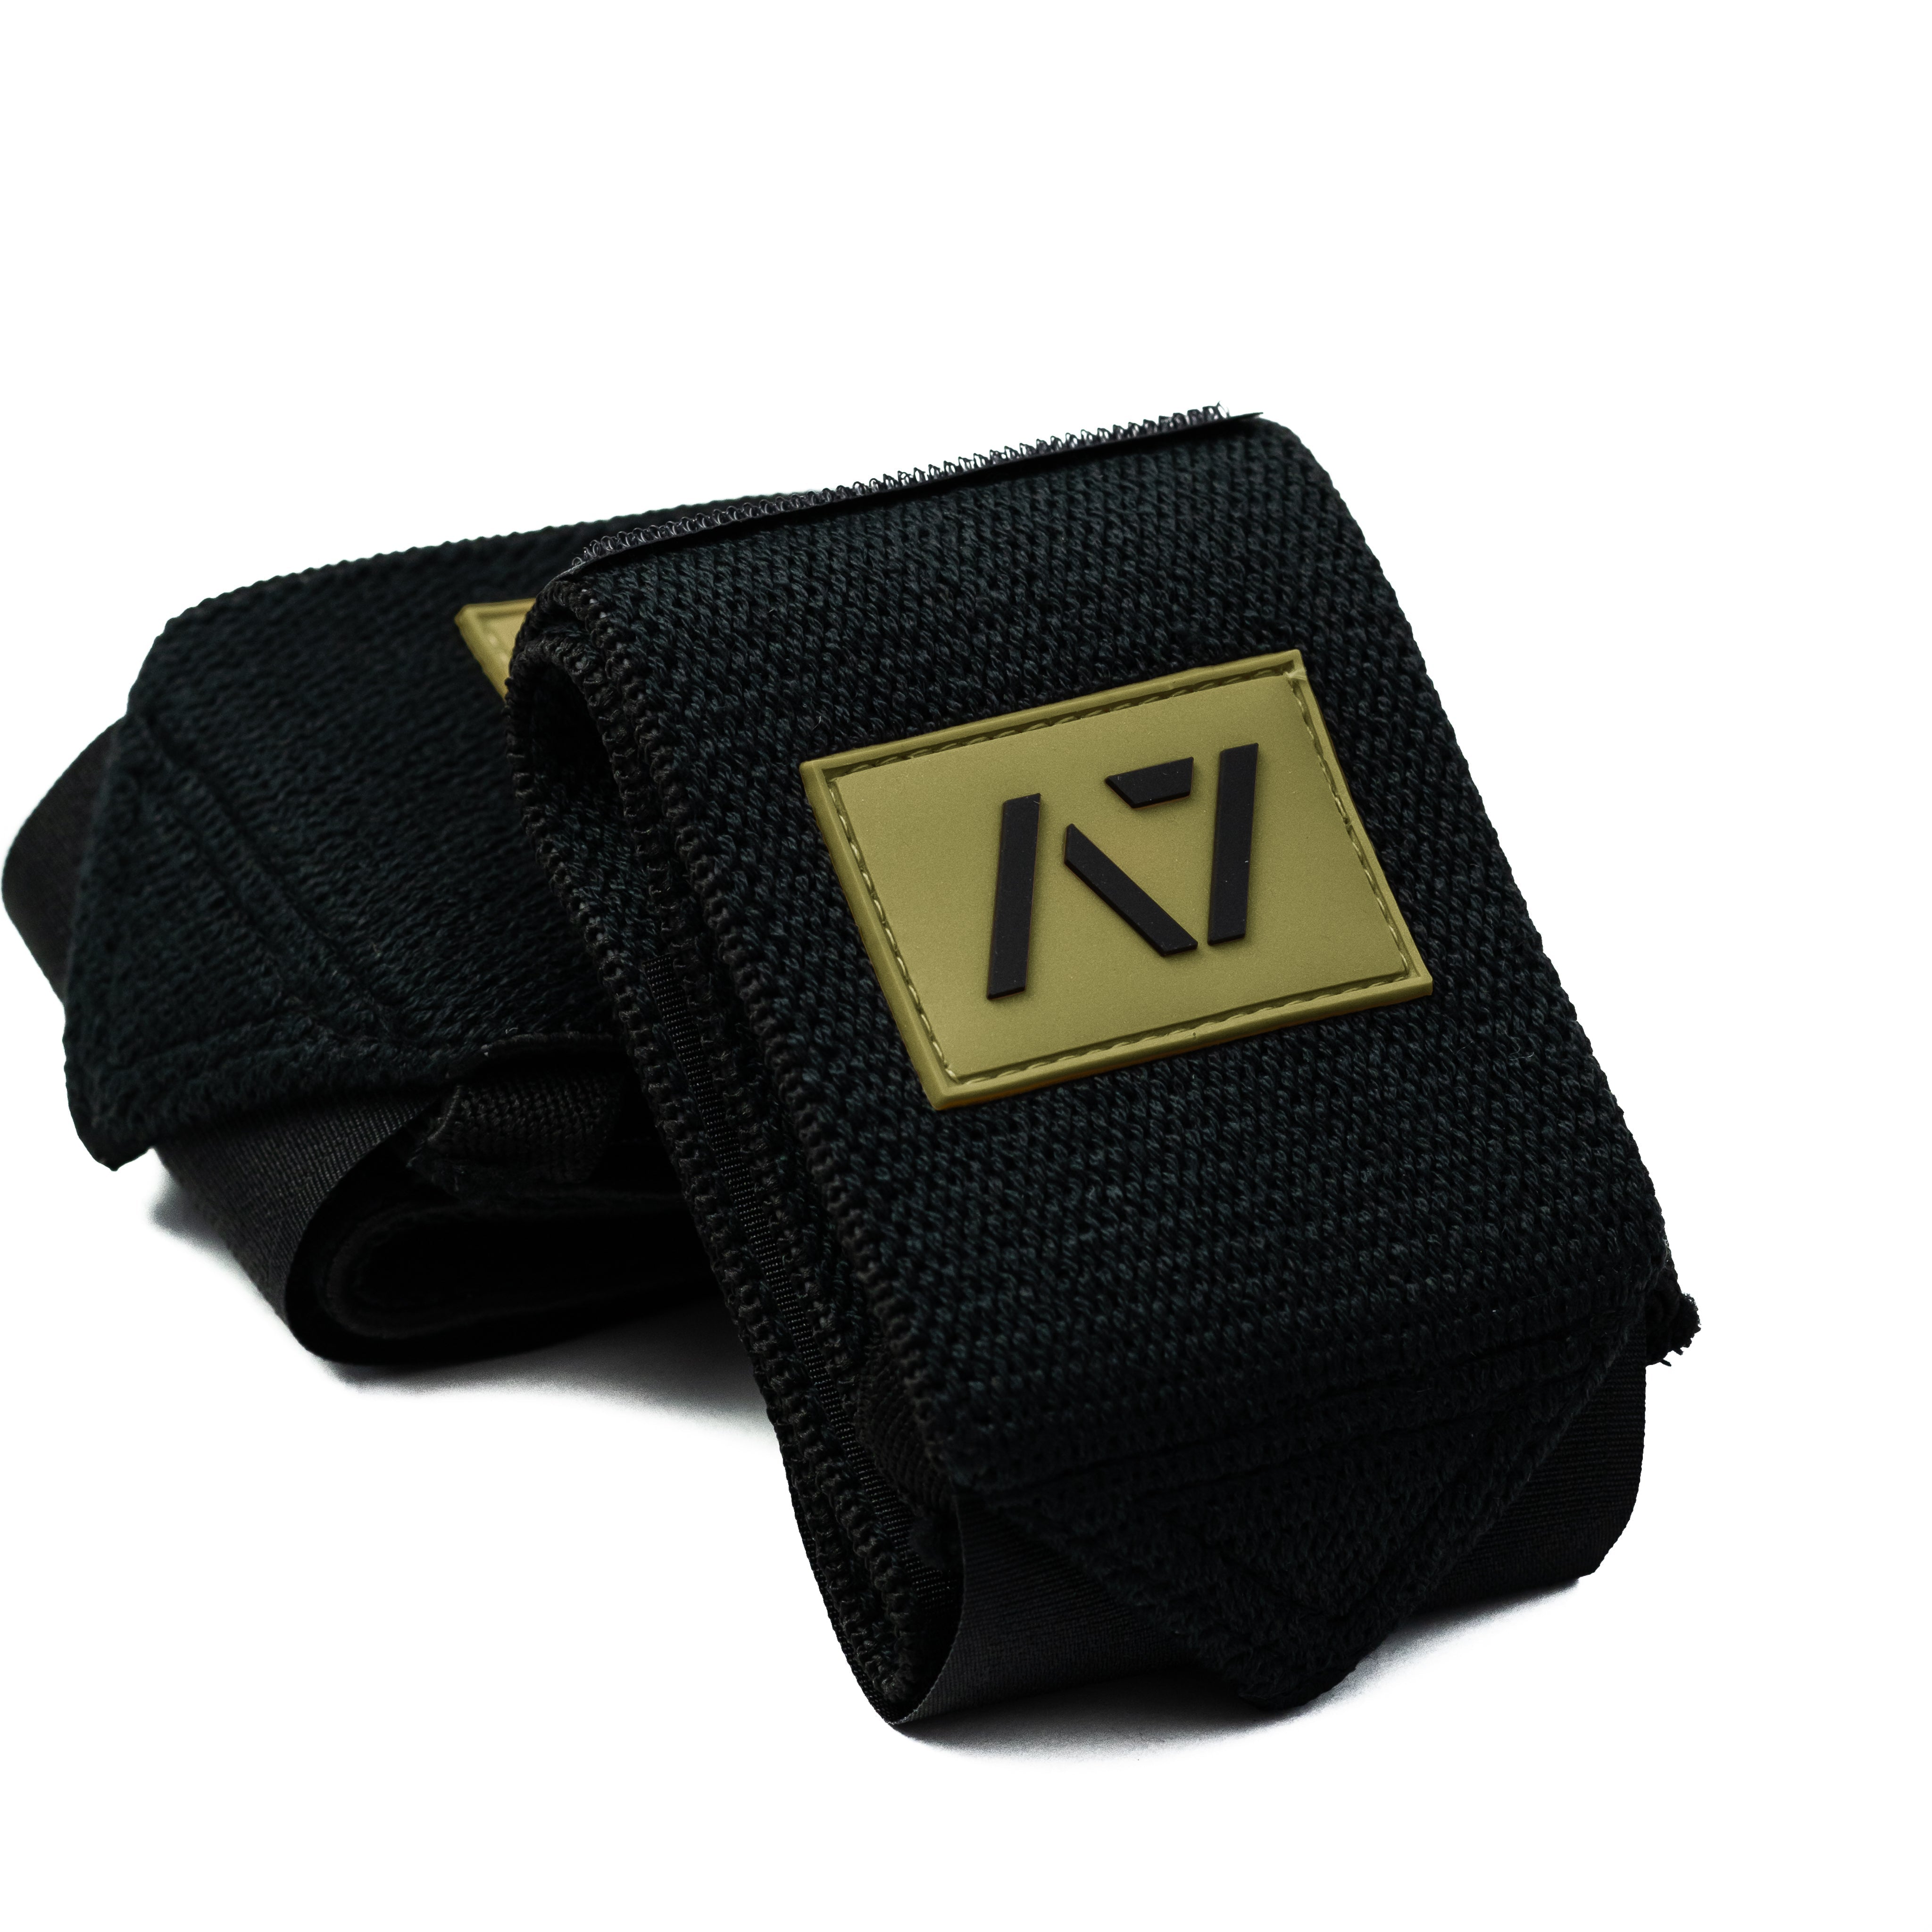 Whether you are benching or squatting, A7 wrist wraps are a perfect addition to your gym bag and IPF approved kit. These wraps feature double thumb loops so you don't ever have to worry about which way you have to put them on. We offer these wrist wraps in 3 sizes : 55 cm, 77 cm and 99 cm. A7 Wrist Wraps are IPF approved.